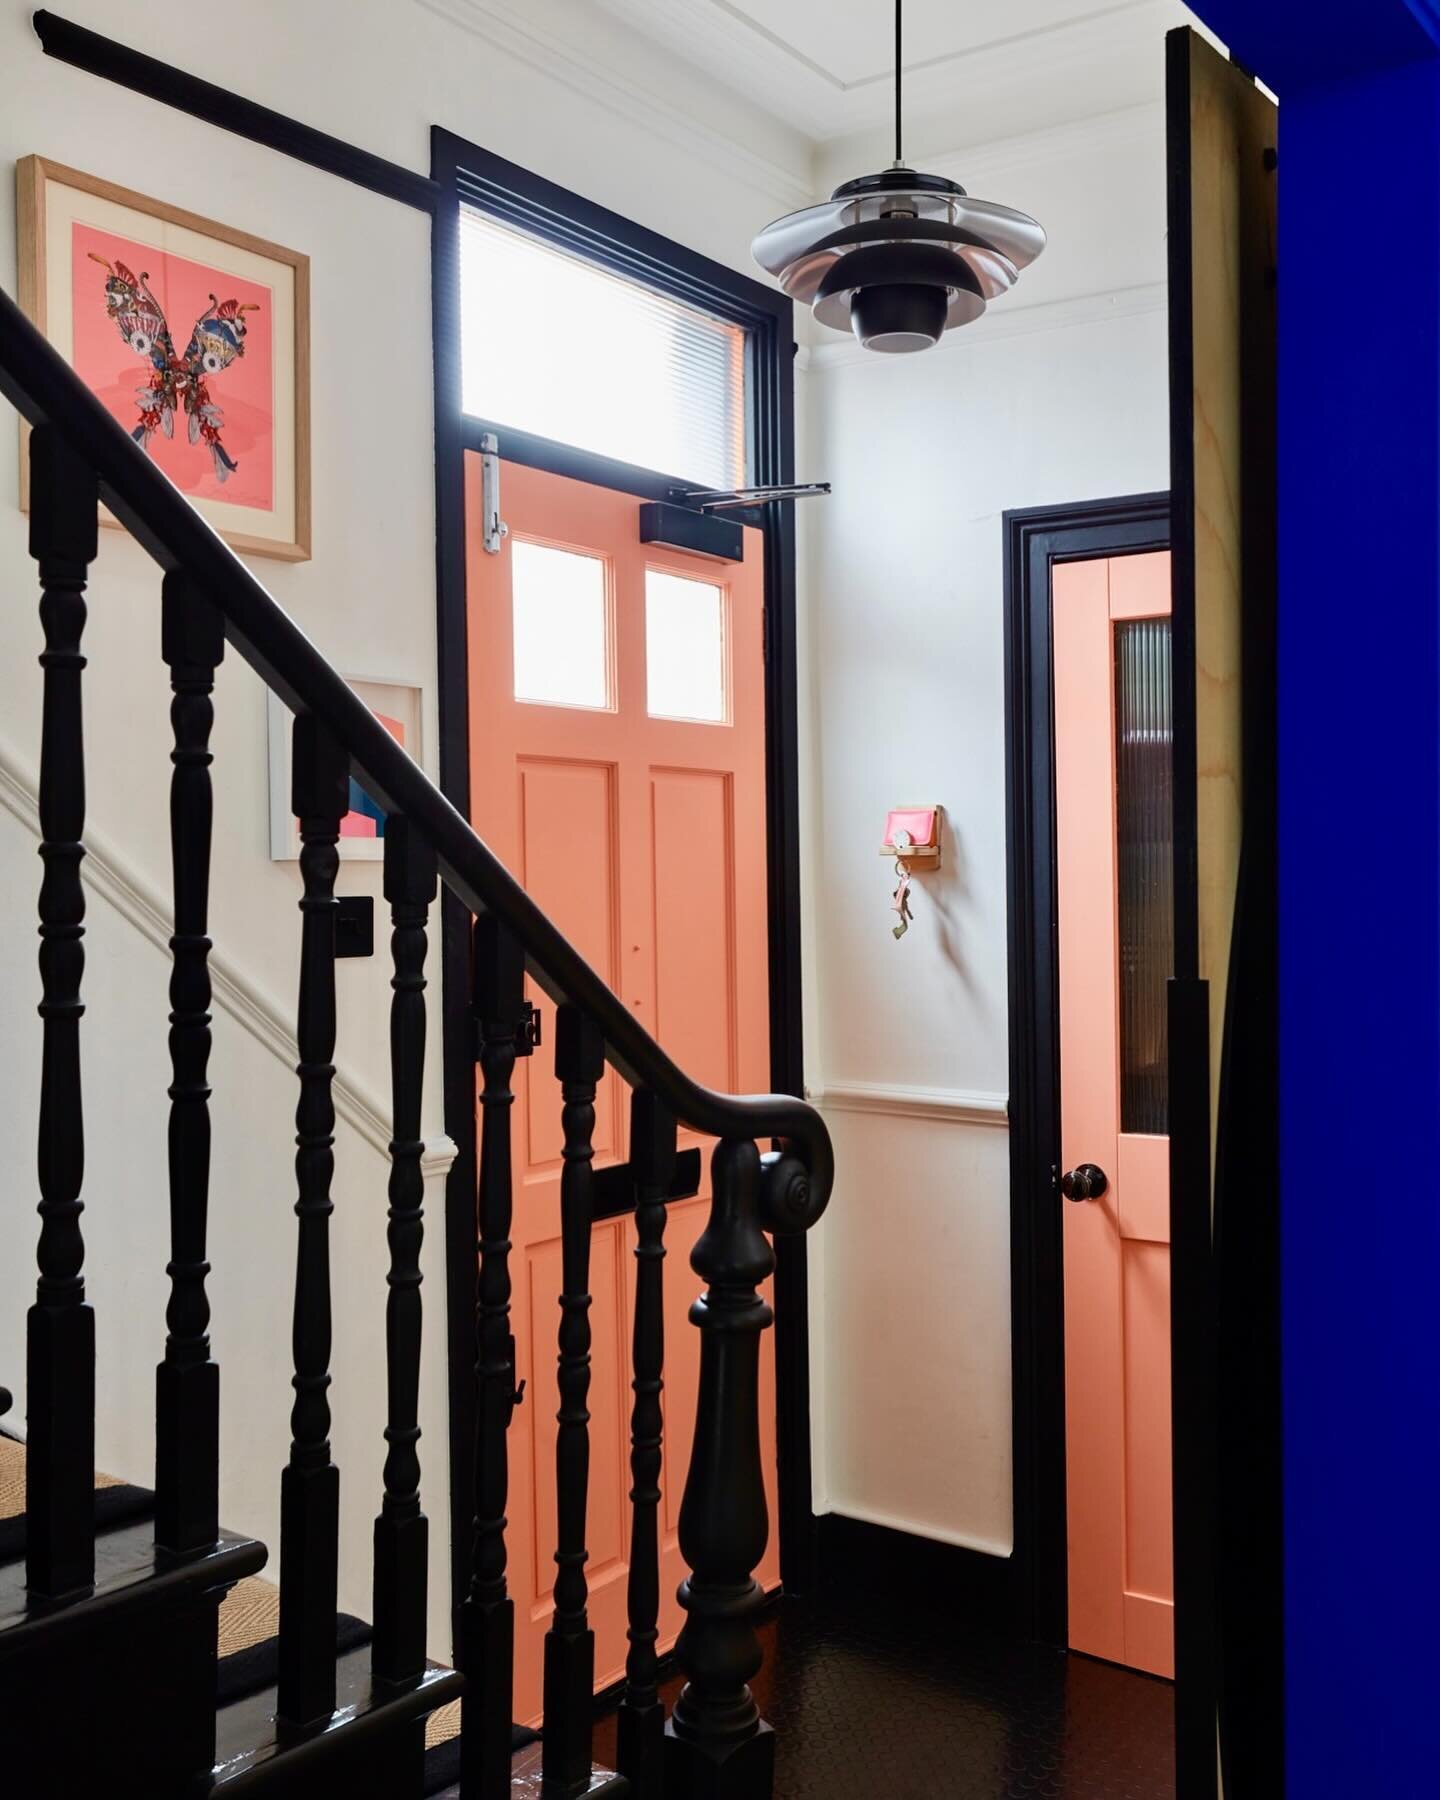 Visitors stepping inside this traditional looking Victorian end of terrace, are greeted with a wow of flamingo-like coral and electric blue. 

Original features sit alongside industrial new additions like the sliding barn door into the reception room